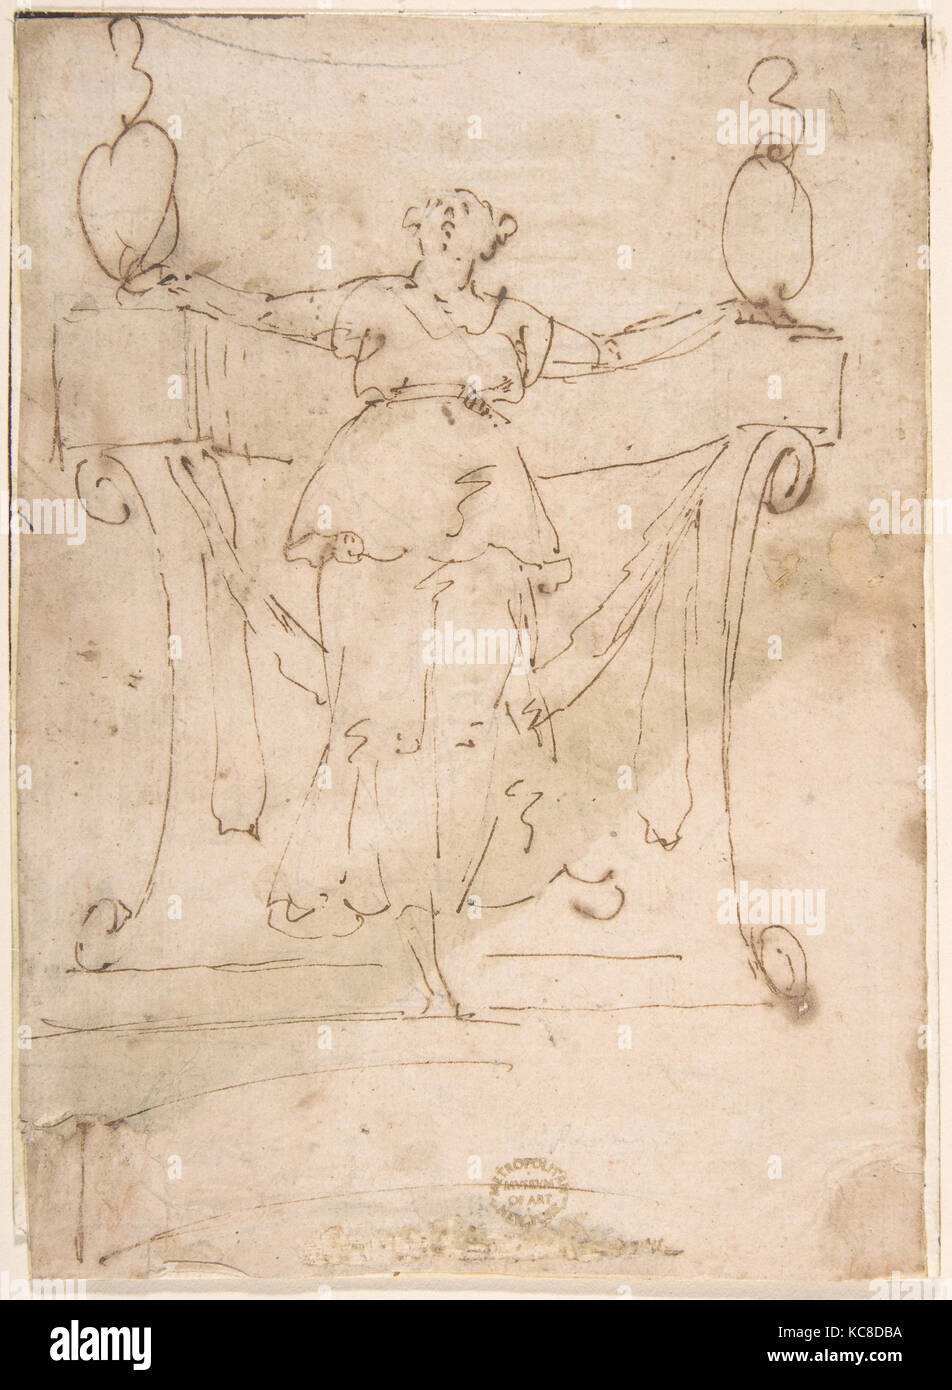 Female Figure, 16th century, Pen and brown ink, 7-1/8 x 5-1/8 in. (18.1 x 13.0 cm), Drawings, Anonymous, Italian, 16th century Stock Photo